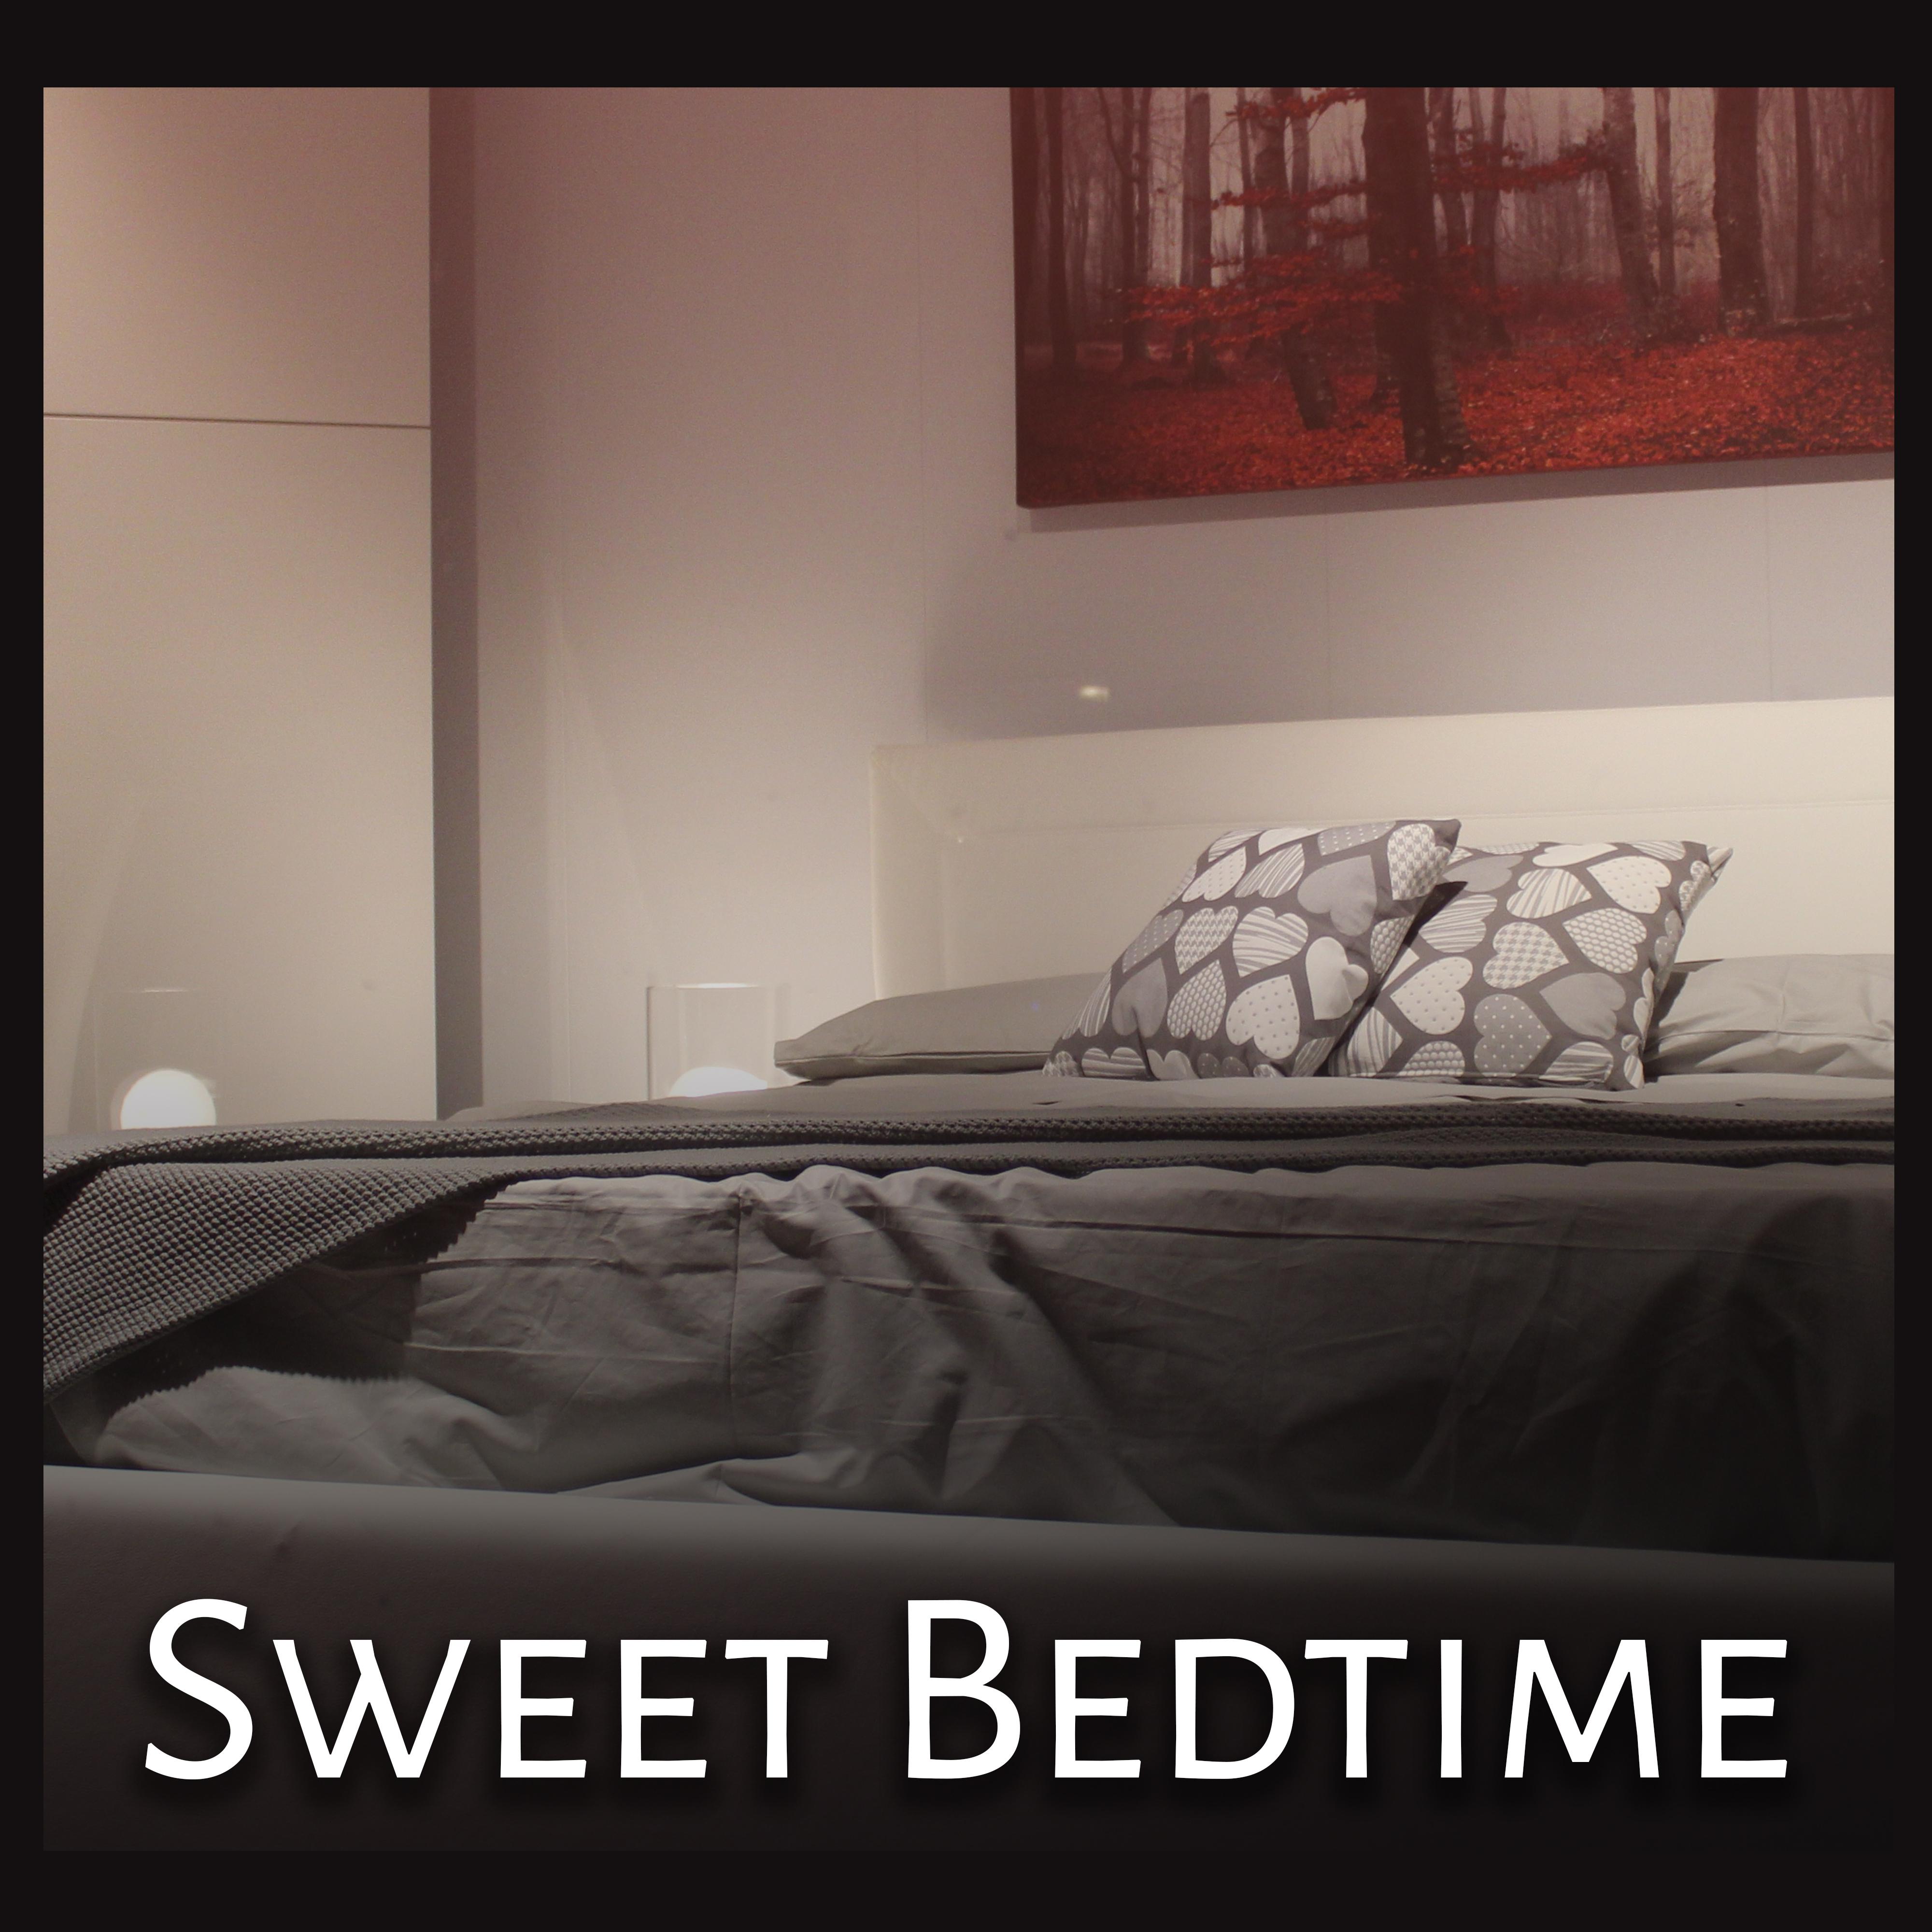 Sweet Bedtime  Soft Music for Sleep, Relaxation, Peaceful Lullabies, Relaxing Therapy to Bed, Calm Down, Restful Sleep, Soothing Sounds